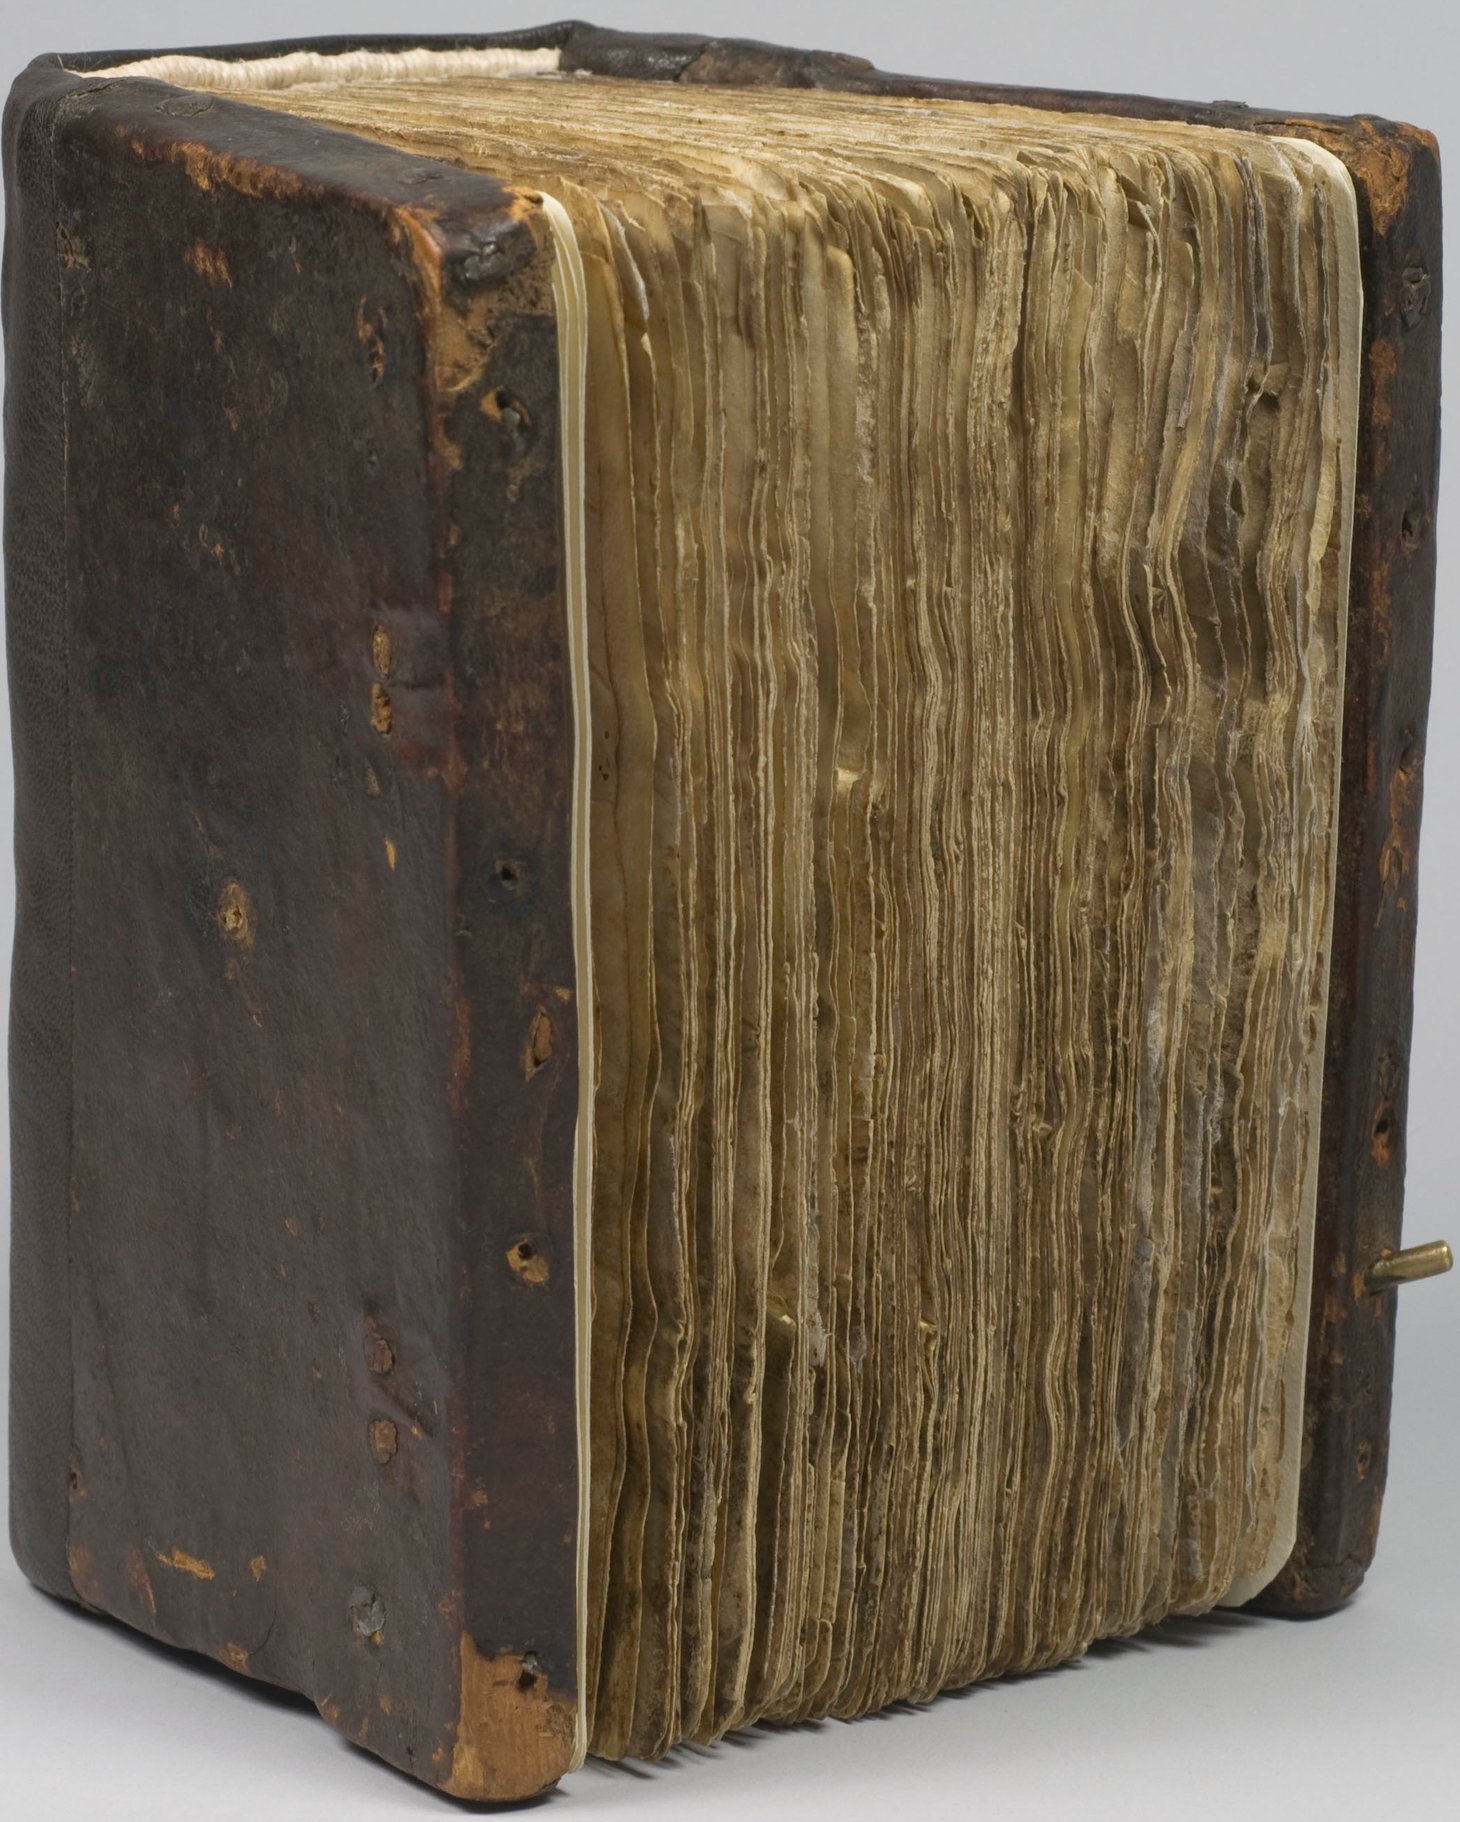 The bound Syriac Galen Palimpsest.CreditCourtesy of the Owner